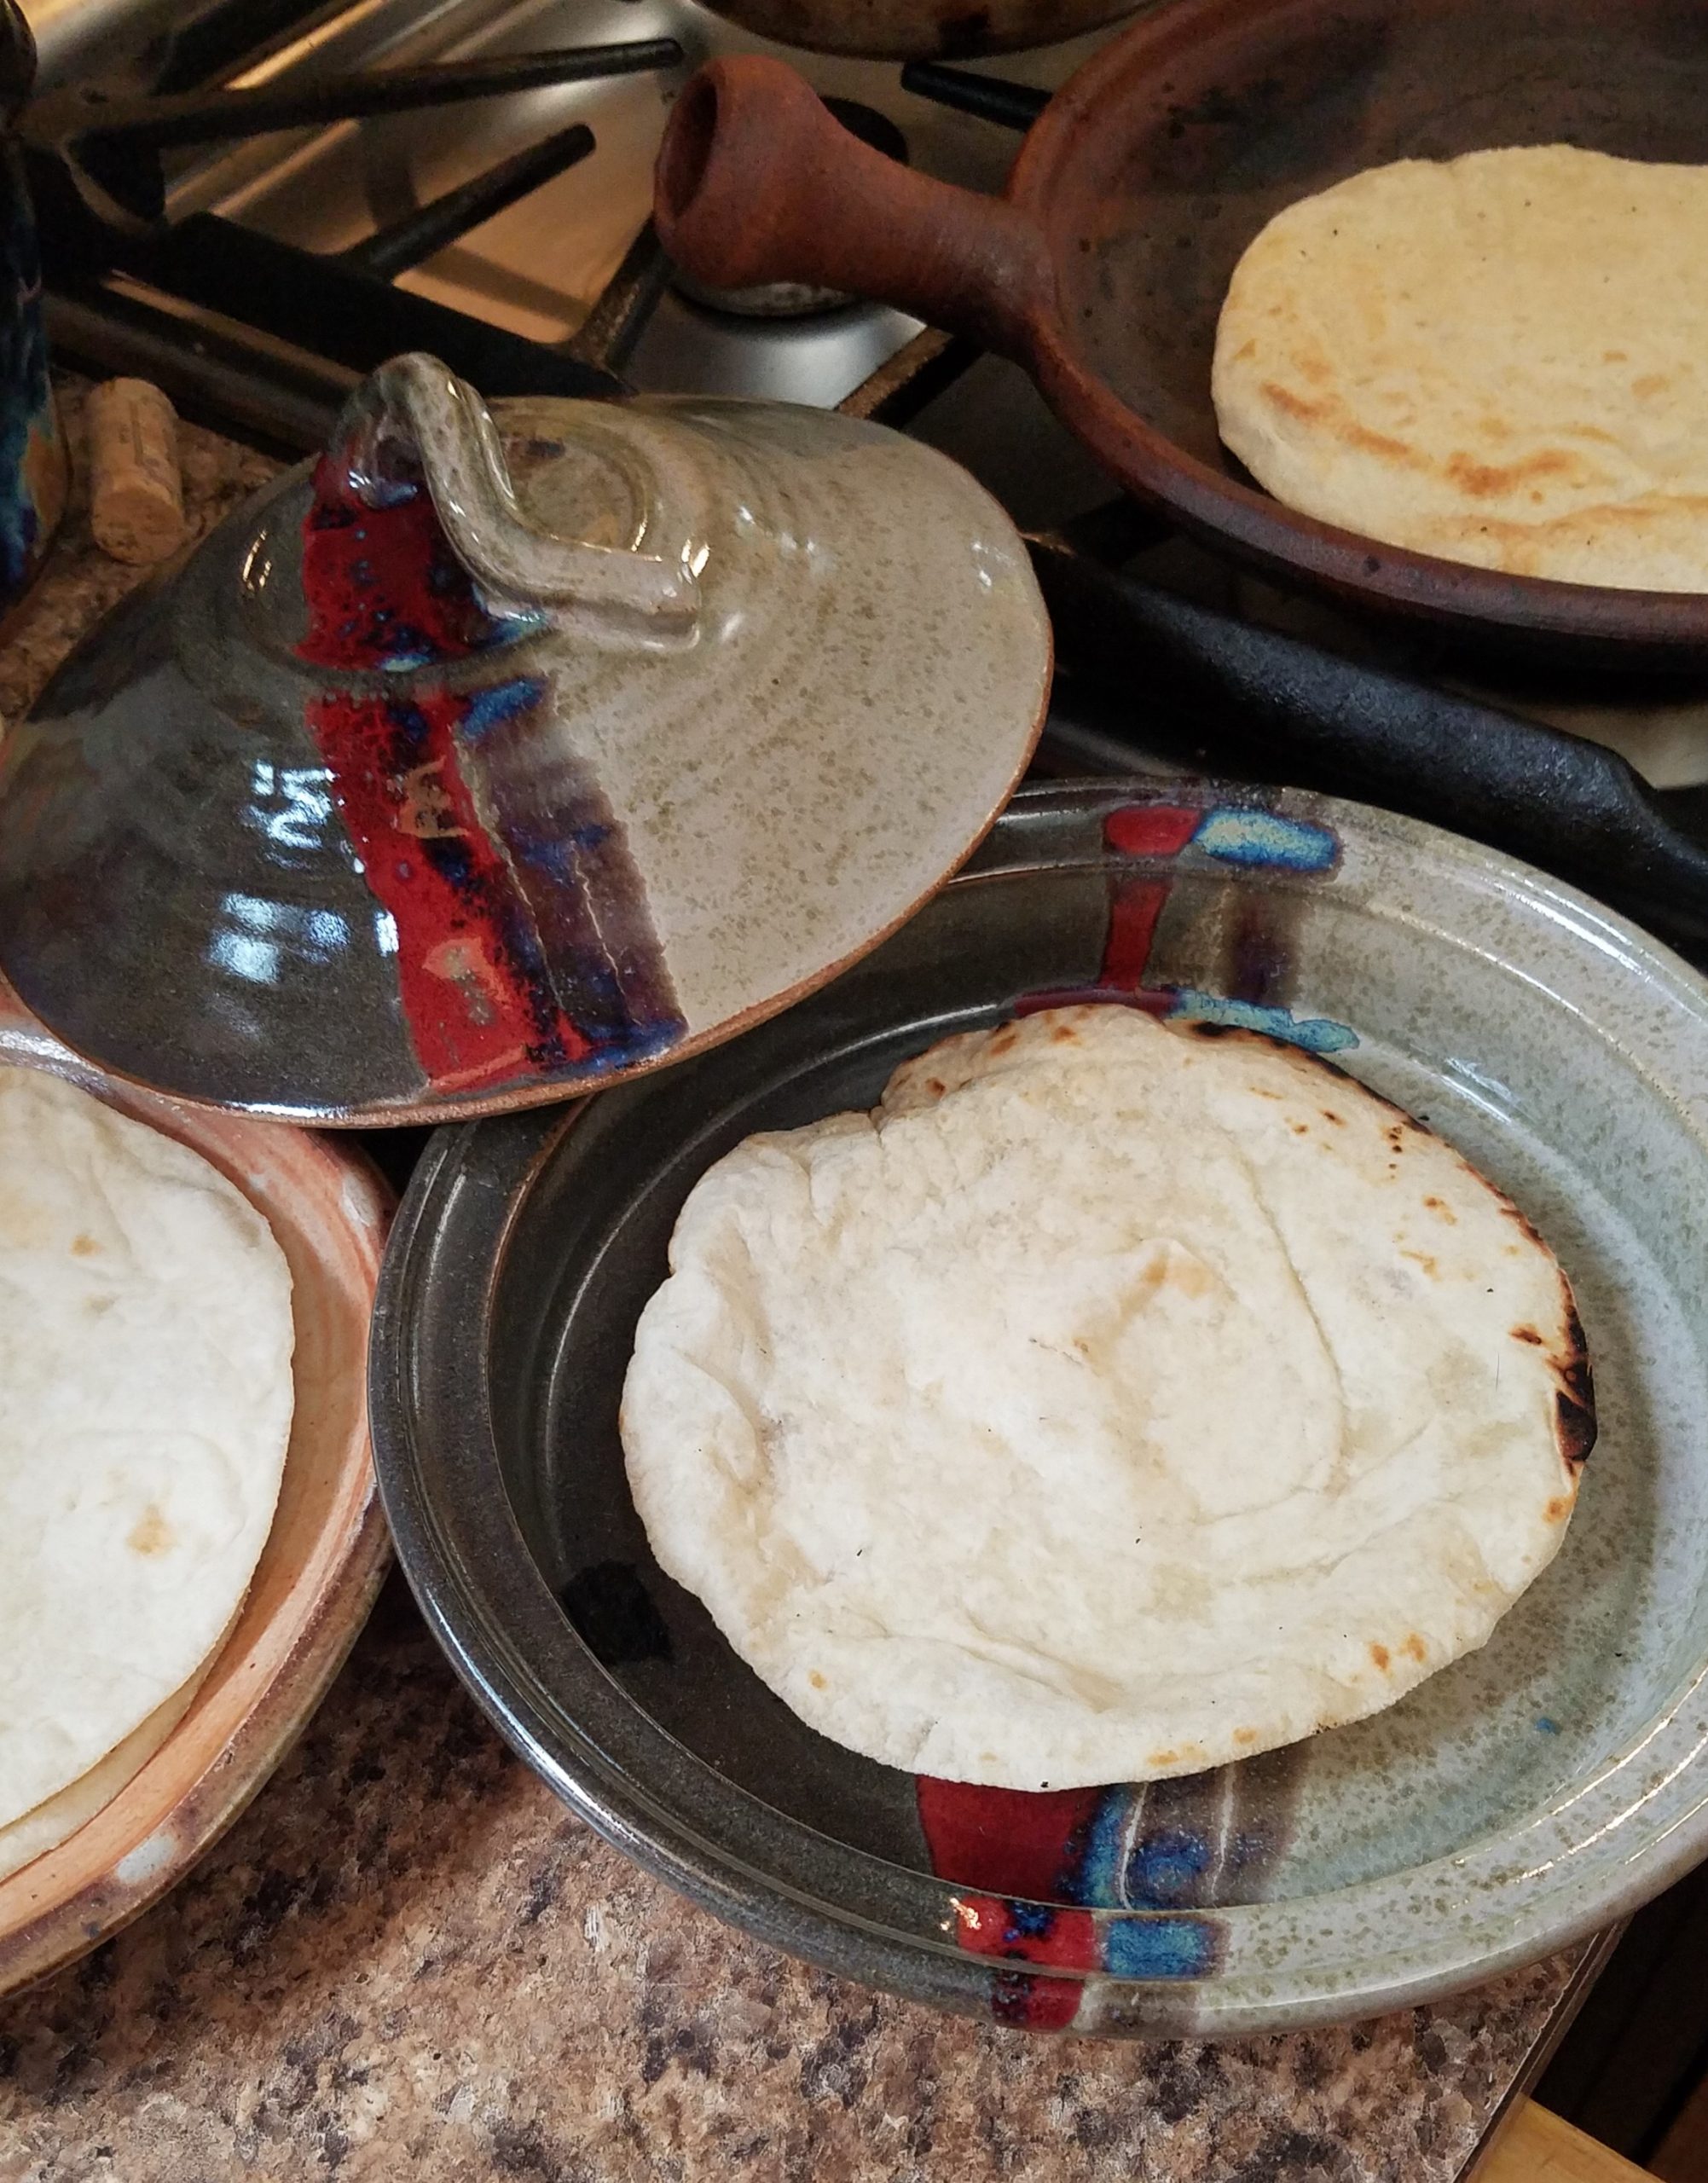 https://newclaypottery.com/wp-content/uploads/2019/07/Serving-Tortilla-Lid-comal-scaled.jpg